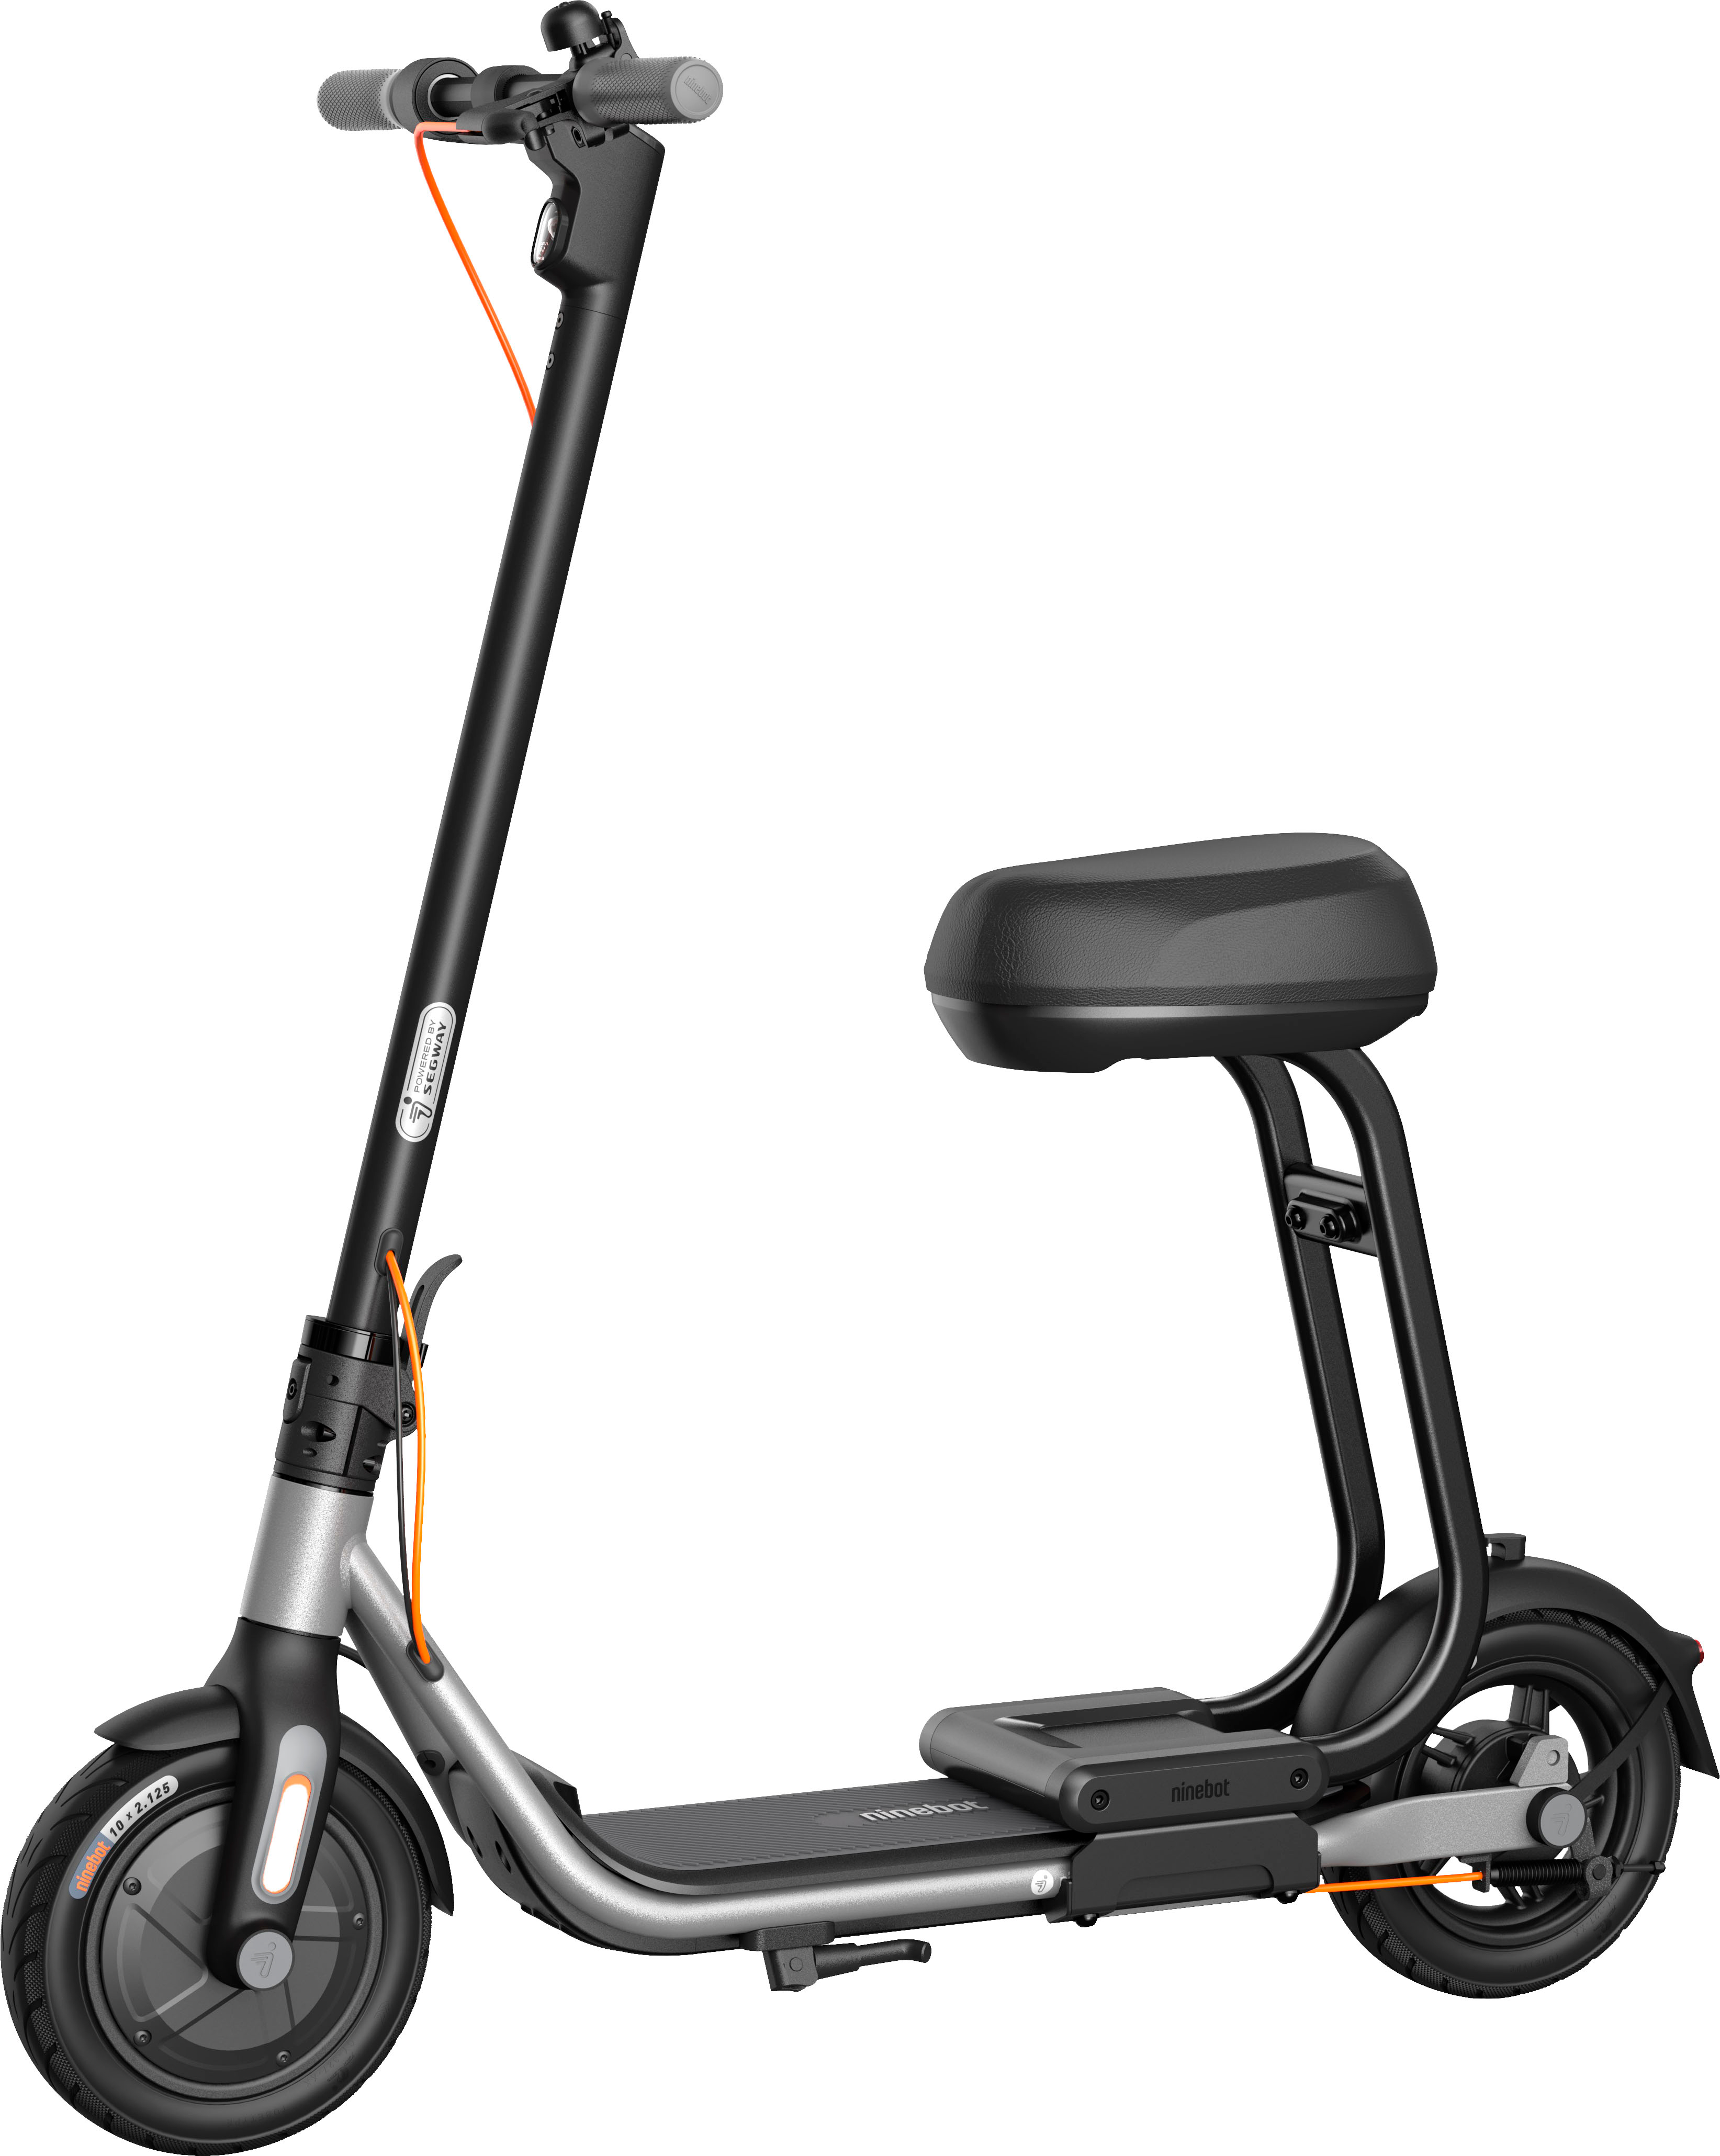 Left View: Hover-1 - Highlander Pro Foldable Electric Scooter w/18 mi Max Operating Range & 15 mph Max Speed - Black